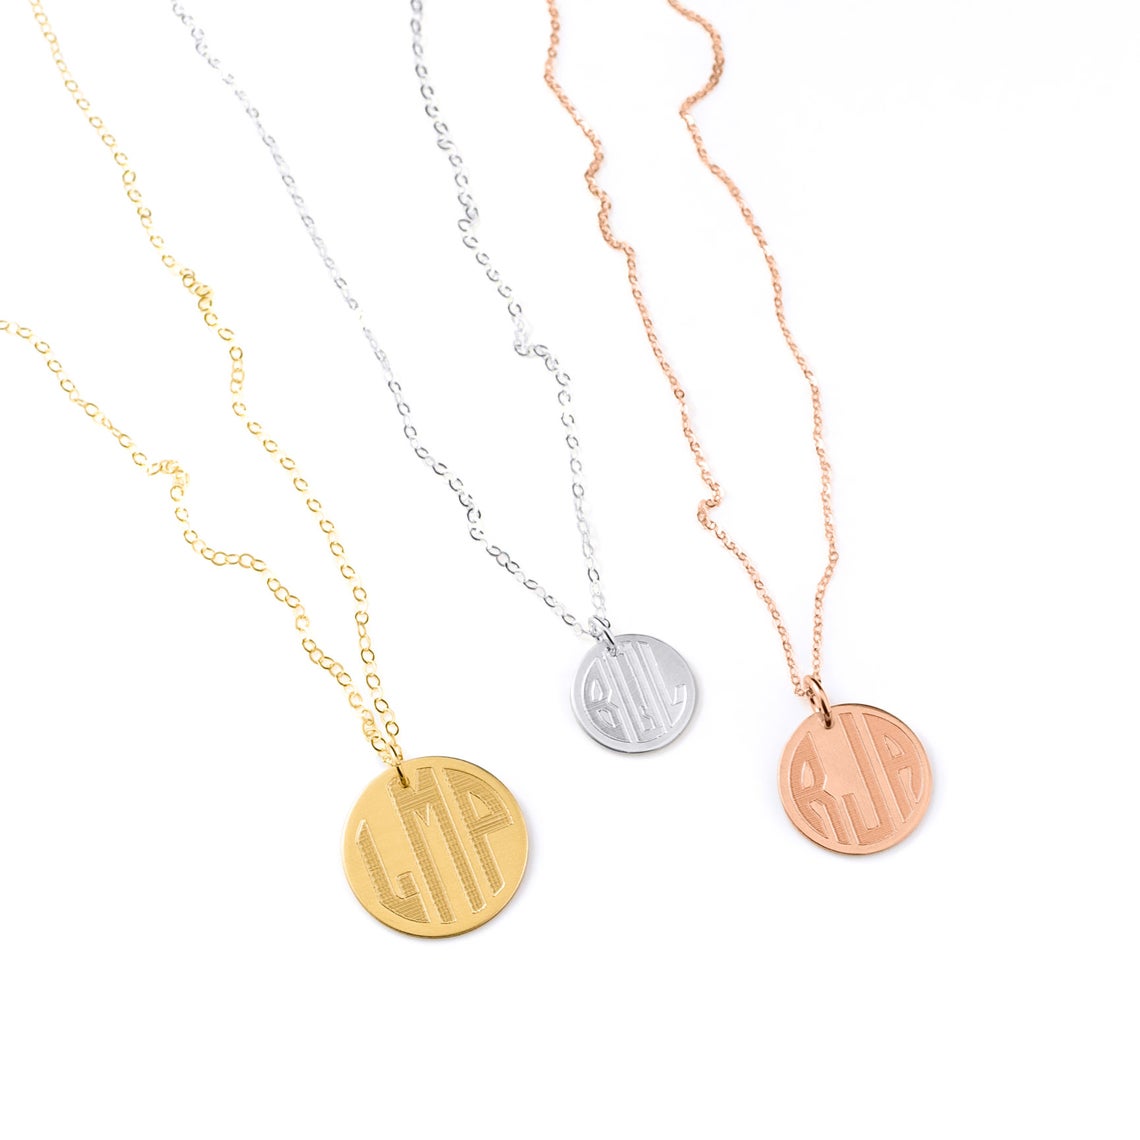 Engraved monogram initials locket handmade from Sterling Silver, Yellow  Gold or Rose Gold